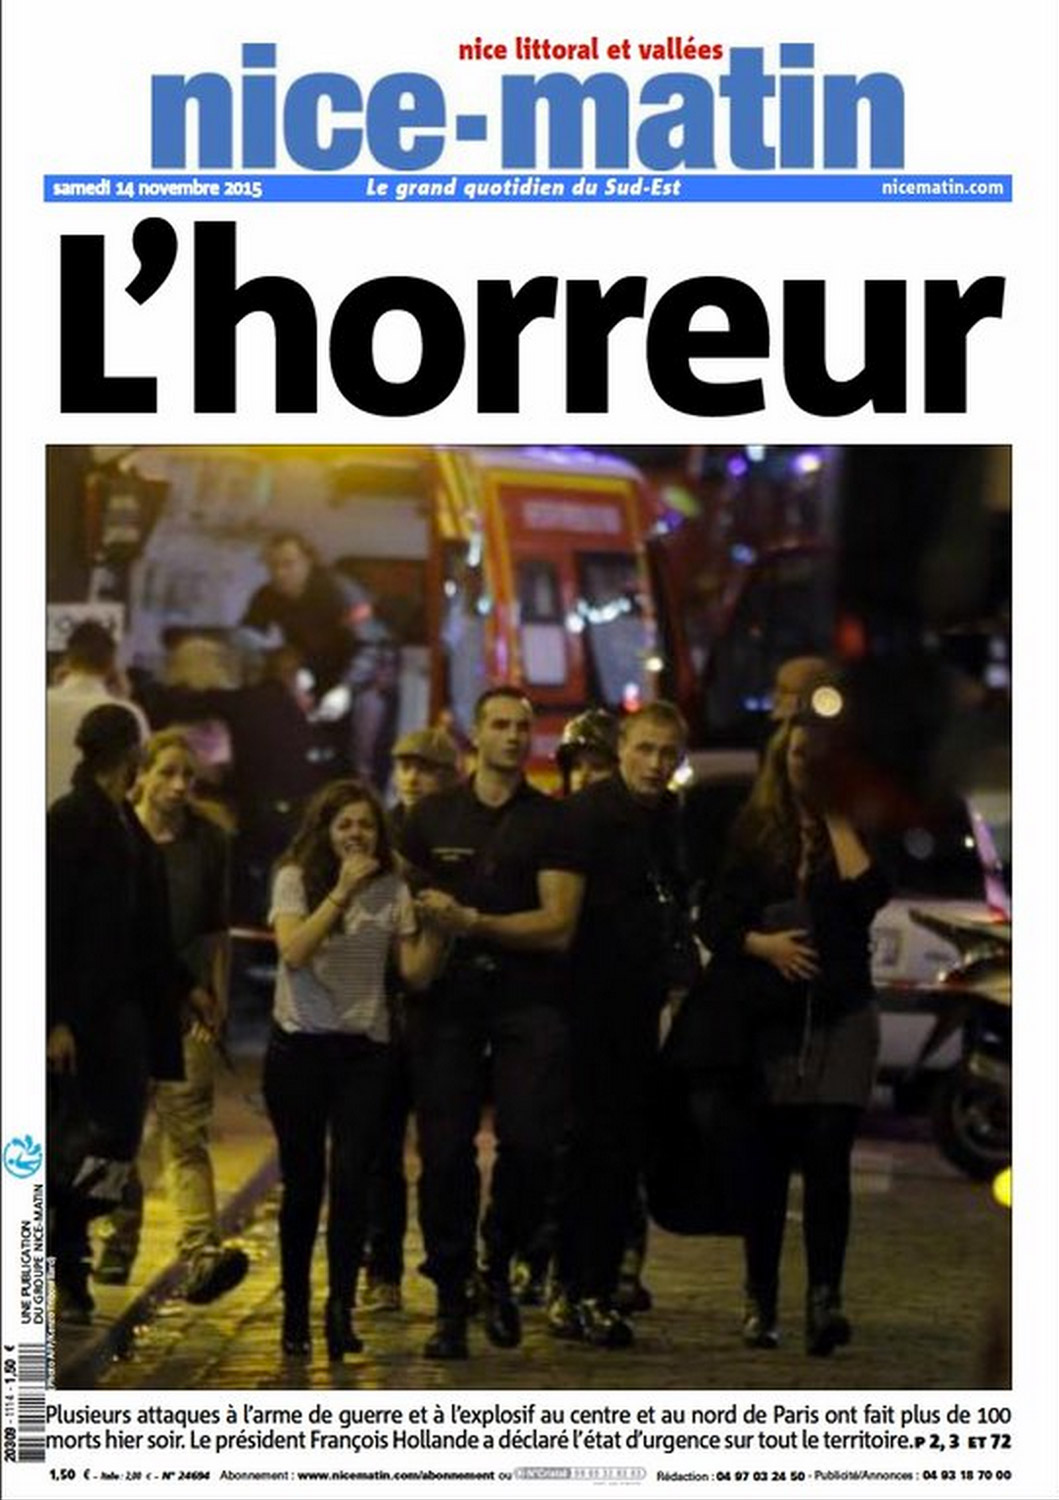 The front page of Nice Matin after the Paris attacks on Nov. 13, 2015